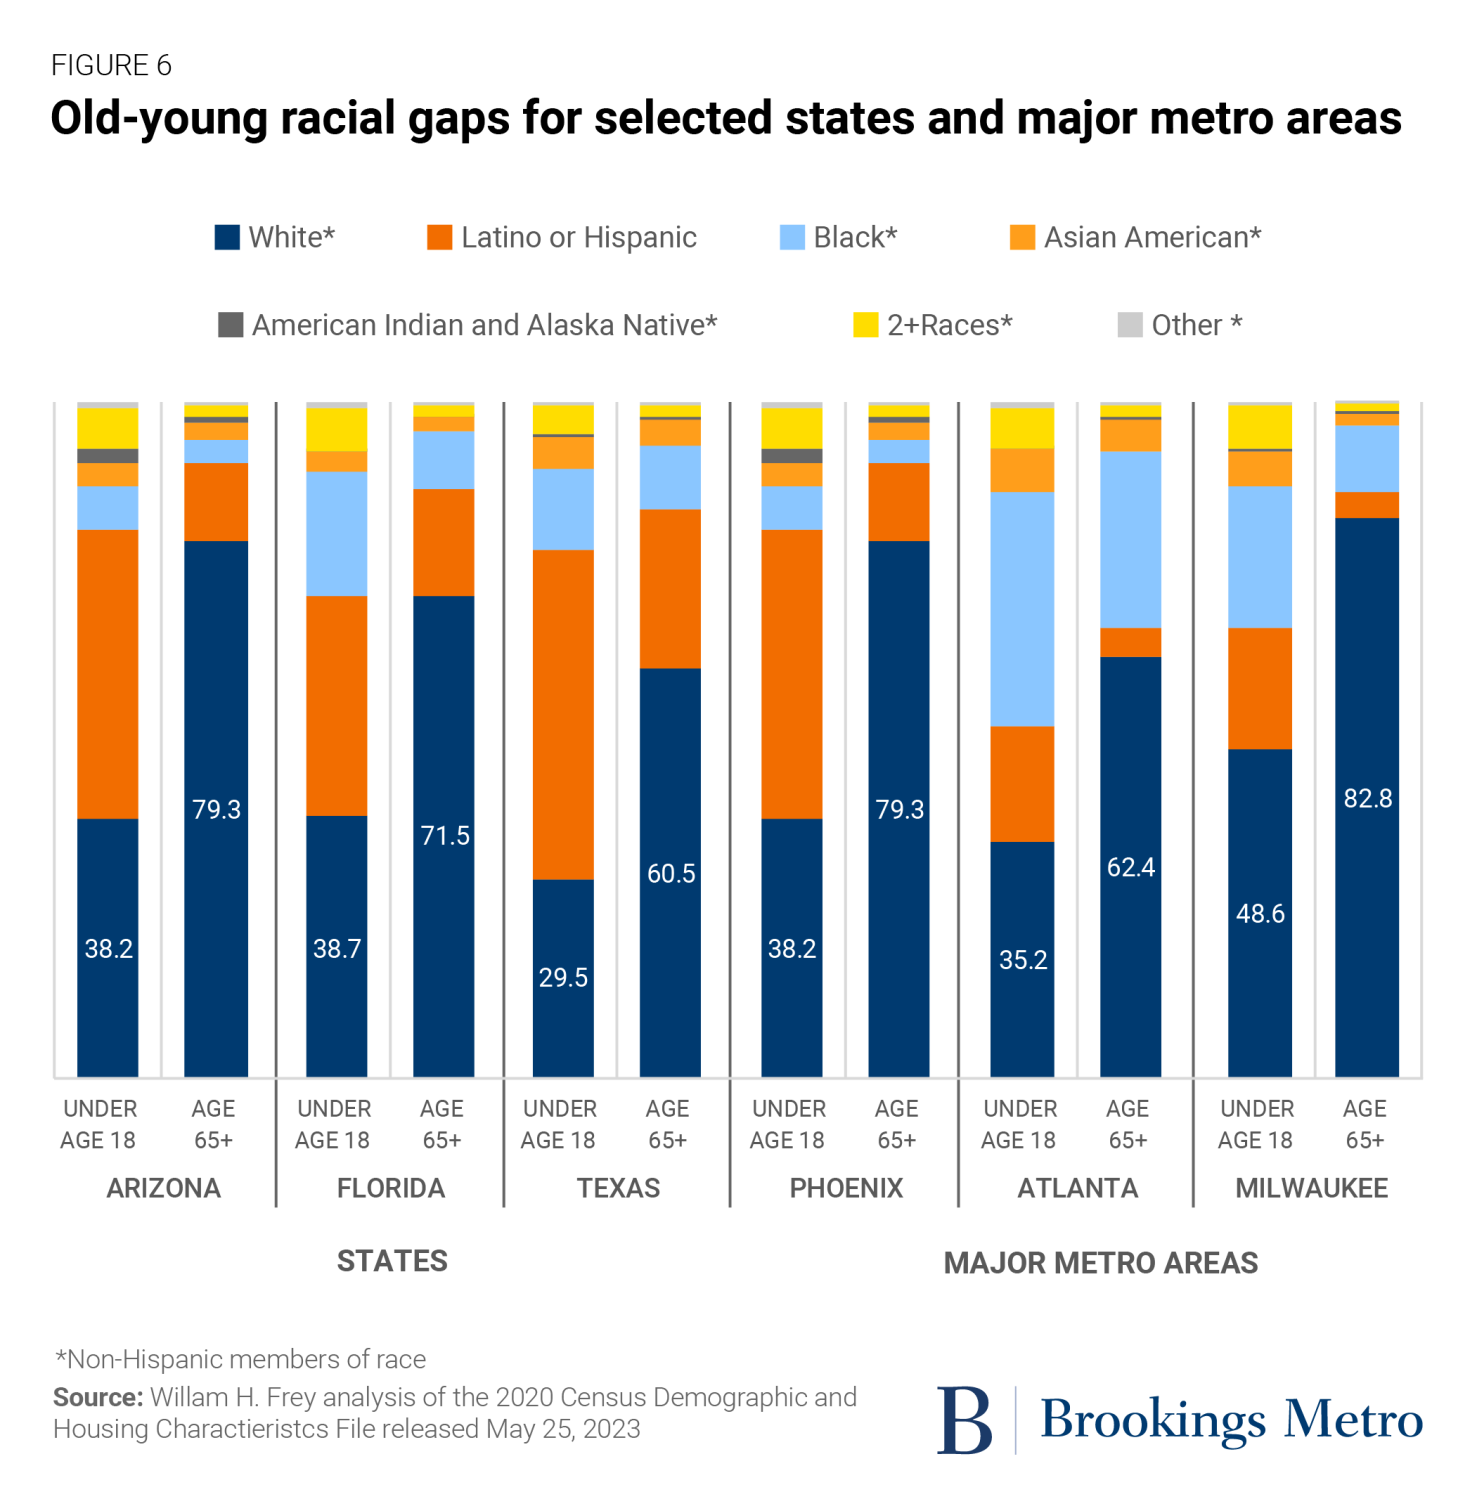 Figure 6: Old-young racial gaps for selected states and major metro areas